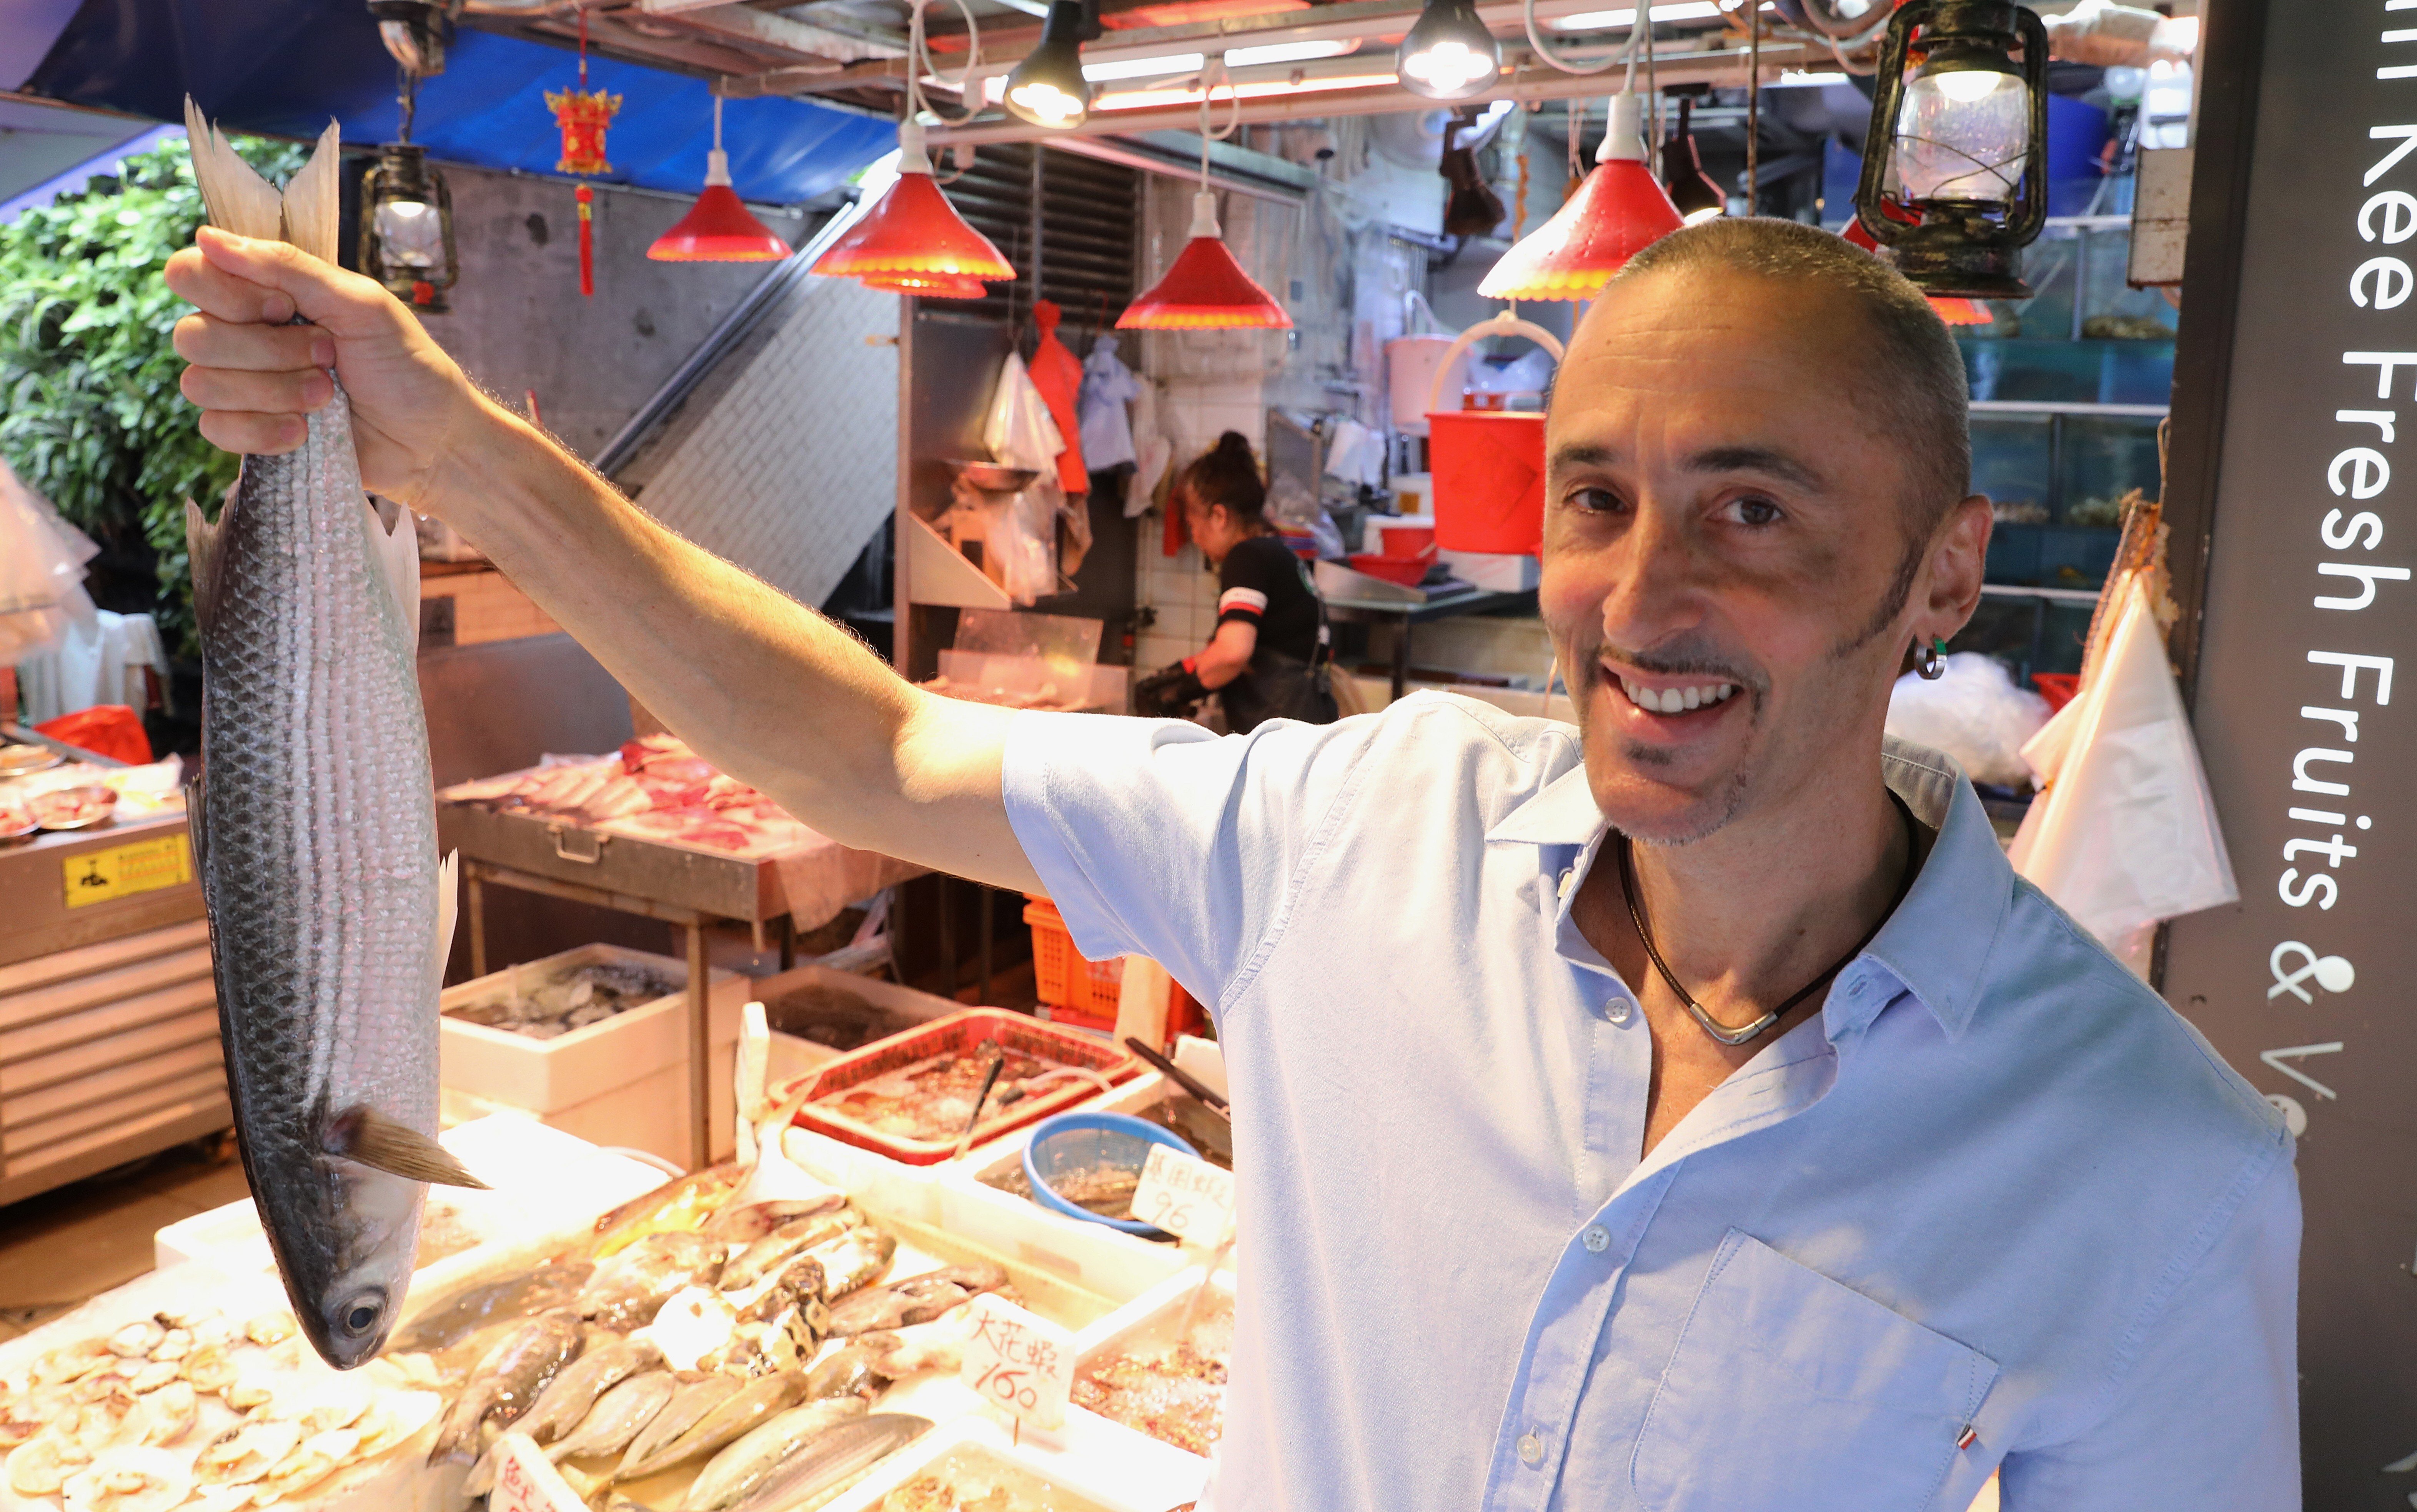 Oliver Smith shops for a keto diet meal at Gage Street Wet Market in Central, Hong Kong. Photo: Dickson Lee